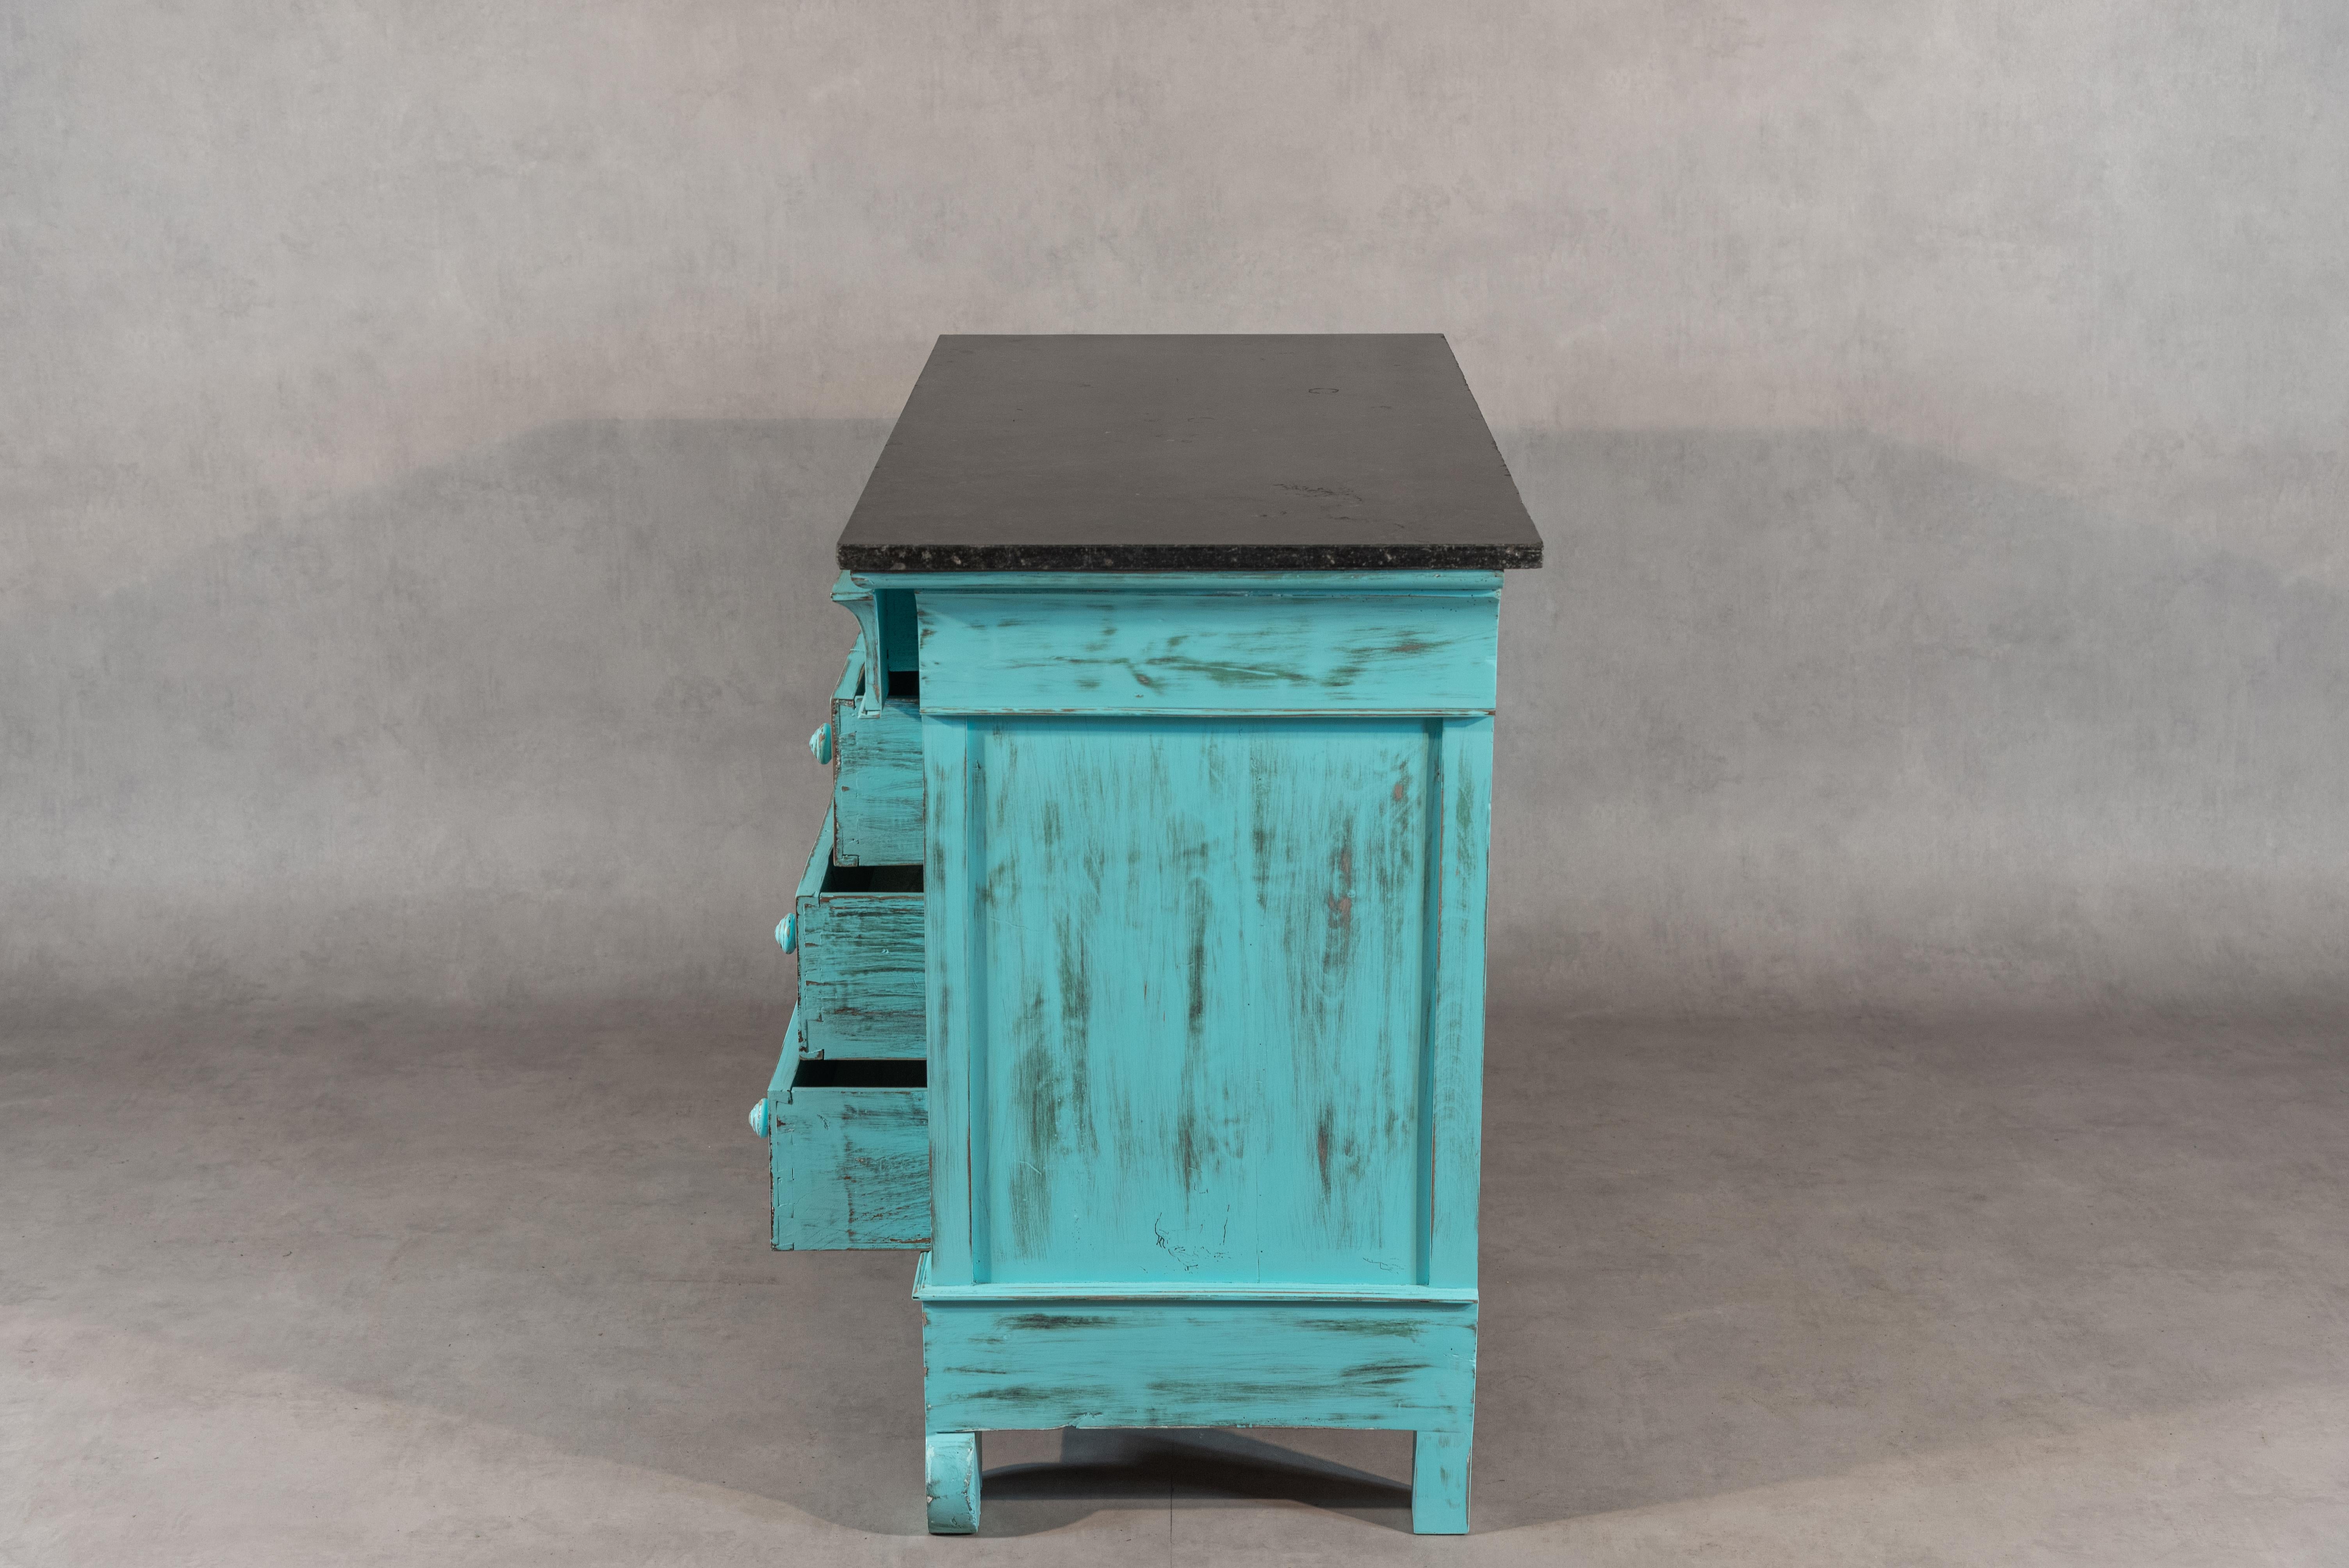 This wonderful French Restauration Period commode has been sanded, bleached, and repainted in a turquoise patina. The wooden knobs on the four drawers add to its charm. Finally, the commode features an impressive Sainte-Anne marble top giving it a